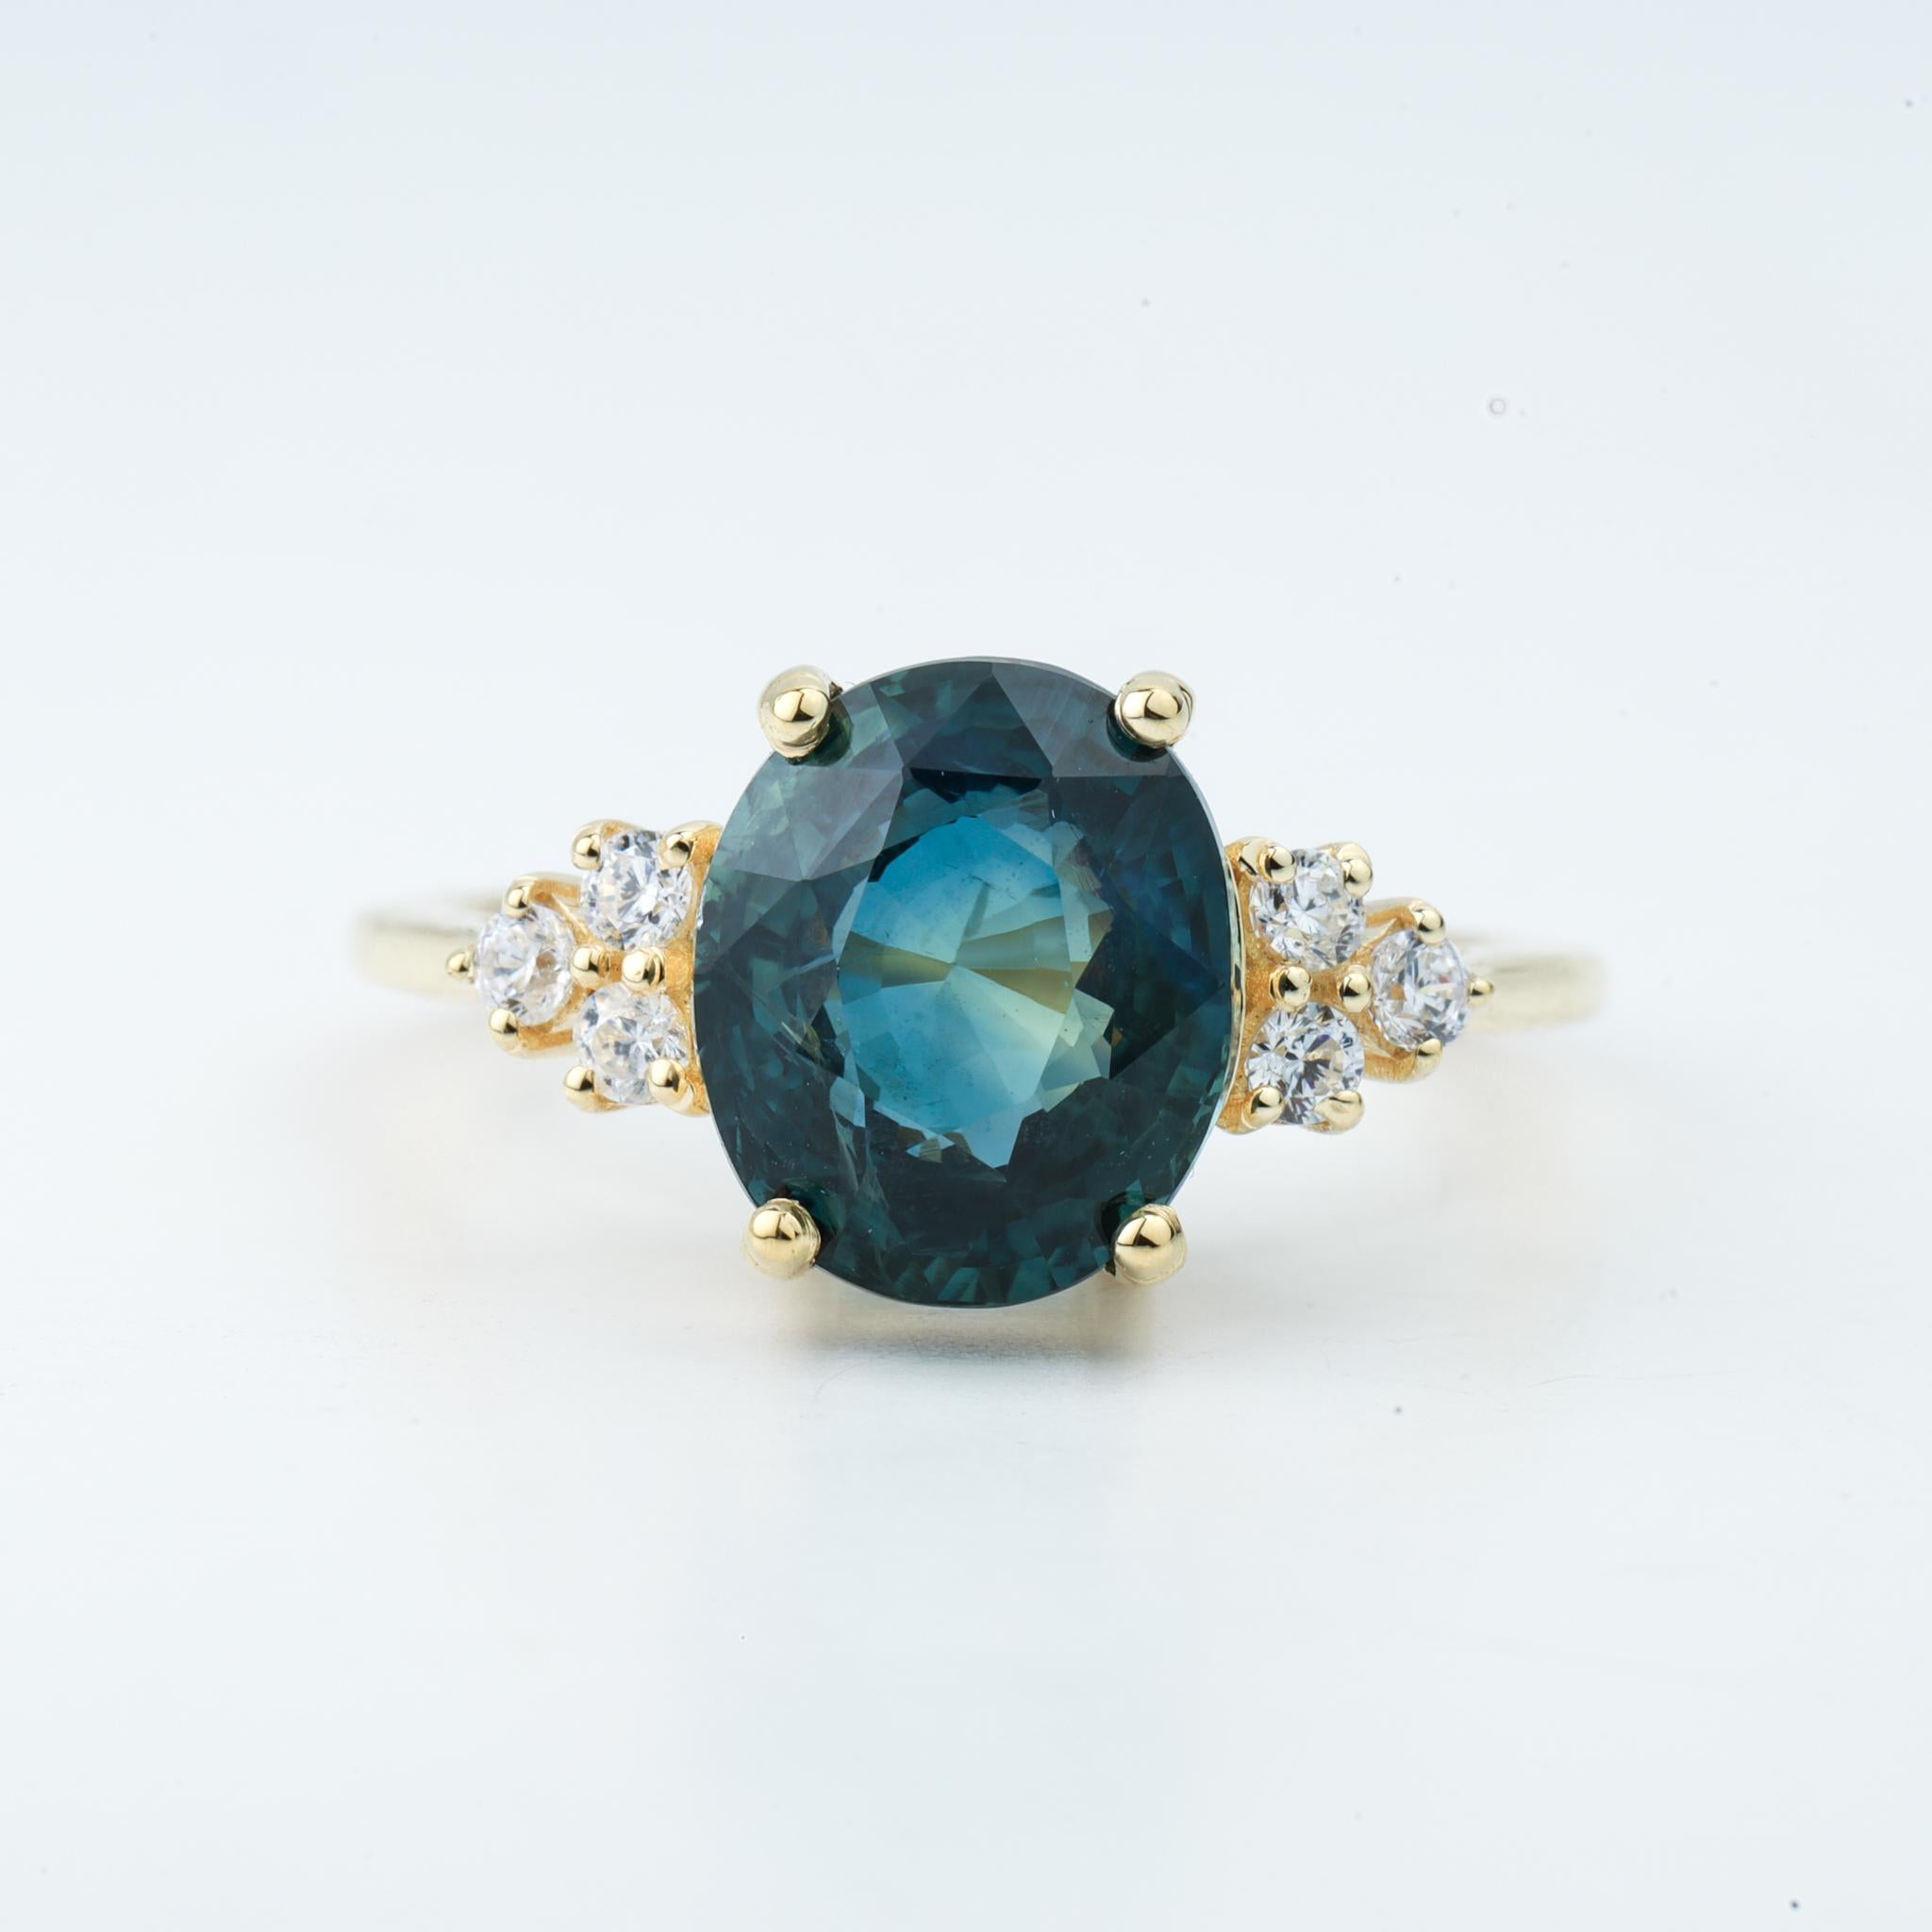 5.5 Carat Natural Teal Sapphire Oval Cocktail Engagement Ring 18k Yellow Gold

Available in 18k yellow gold.

Same design can be made also with other custom gemstones per request.

Product details:

- Solid gold

- Side diamonds - 2.2mm. E VS

-